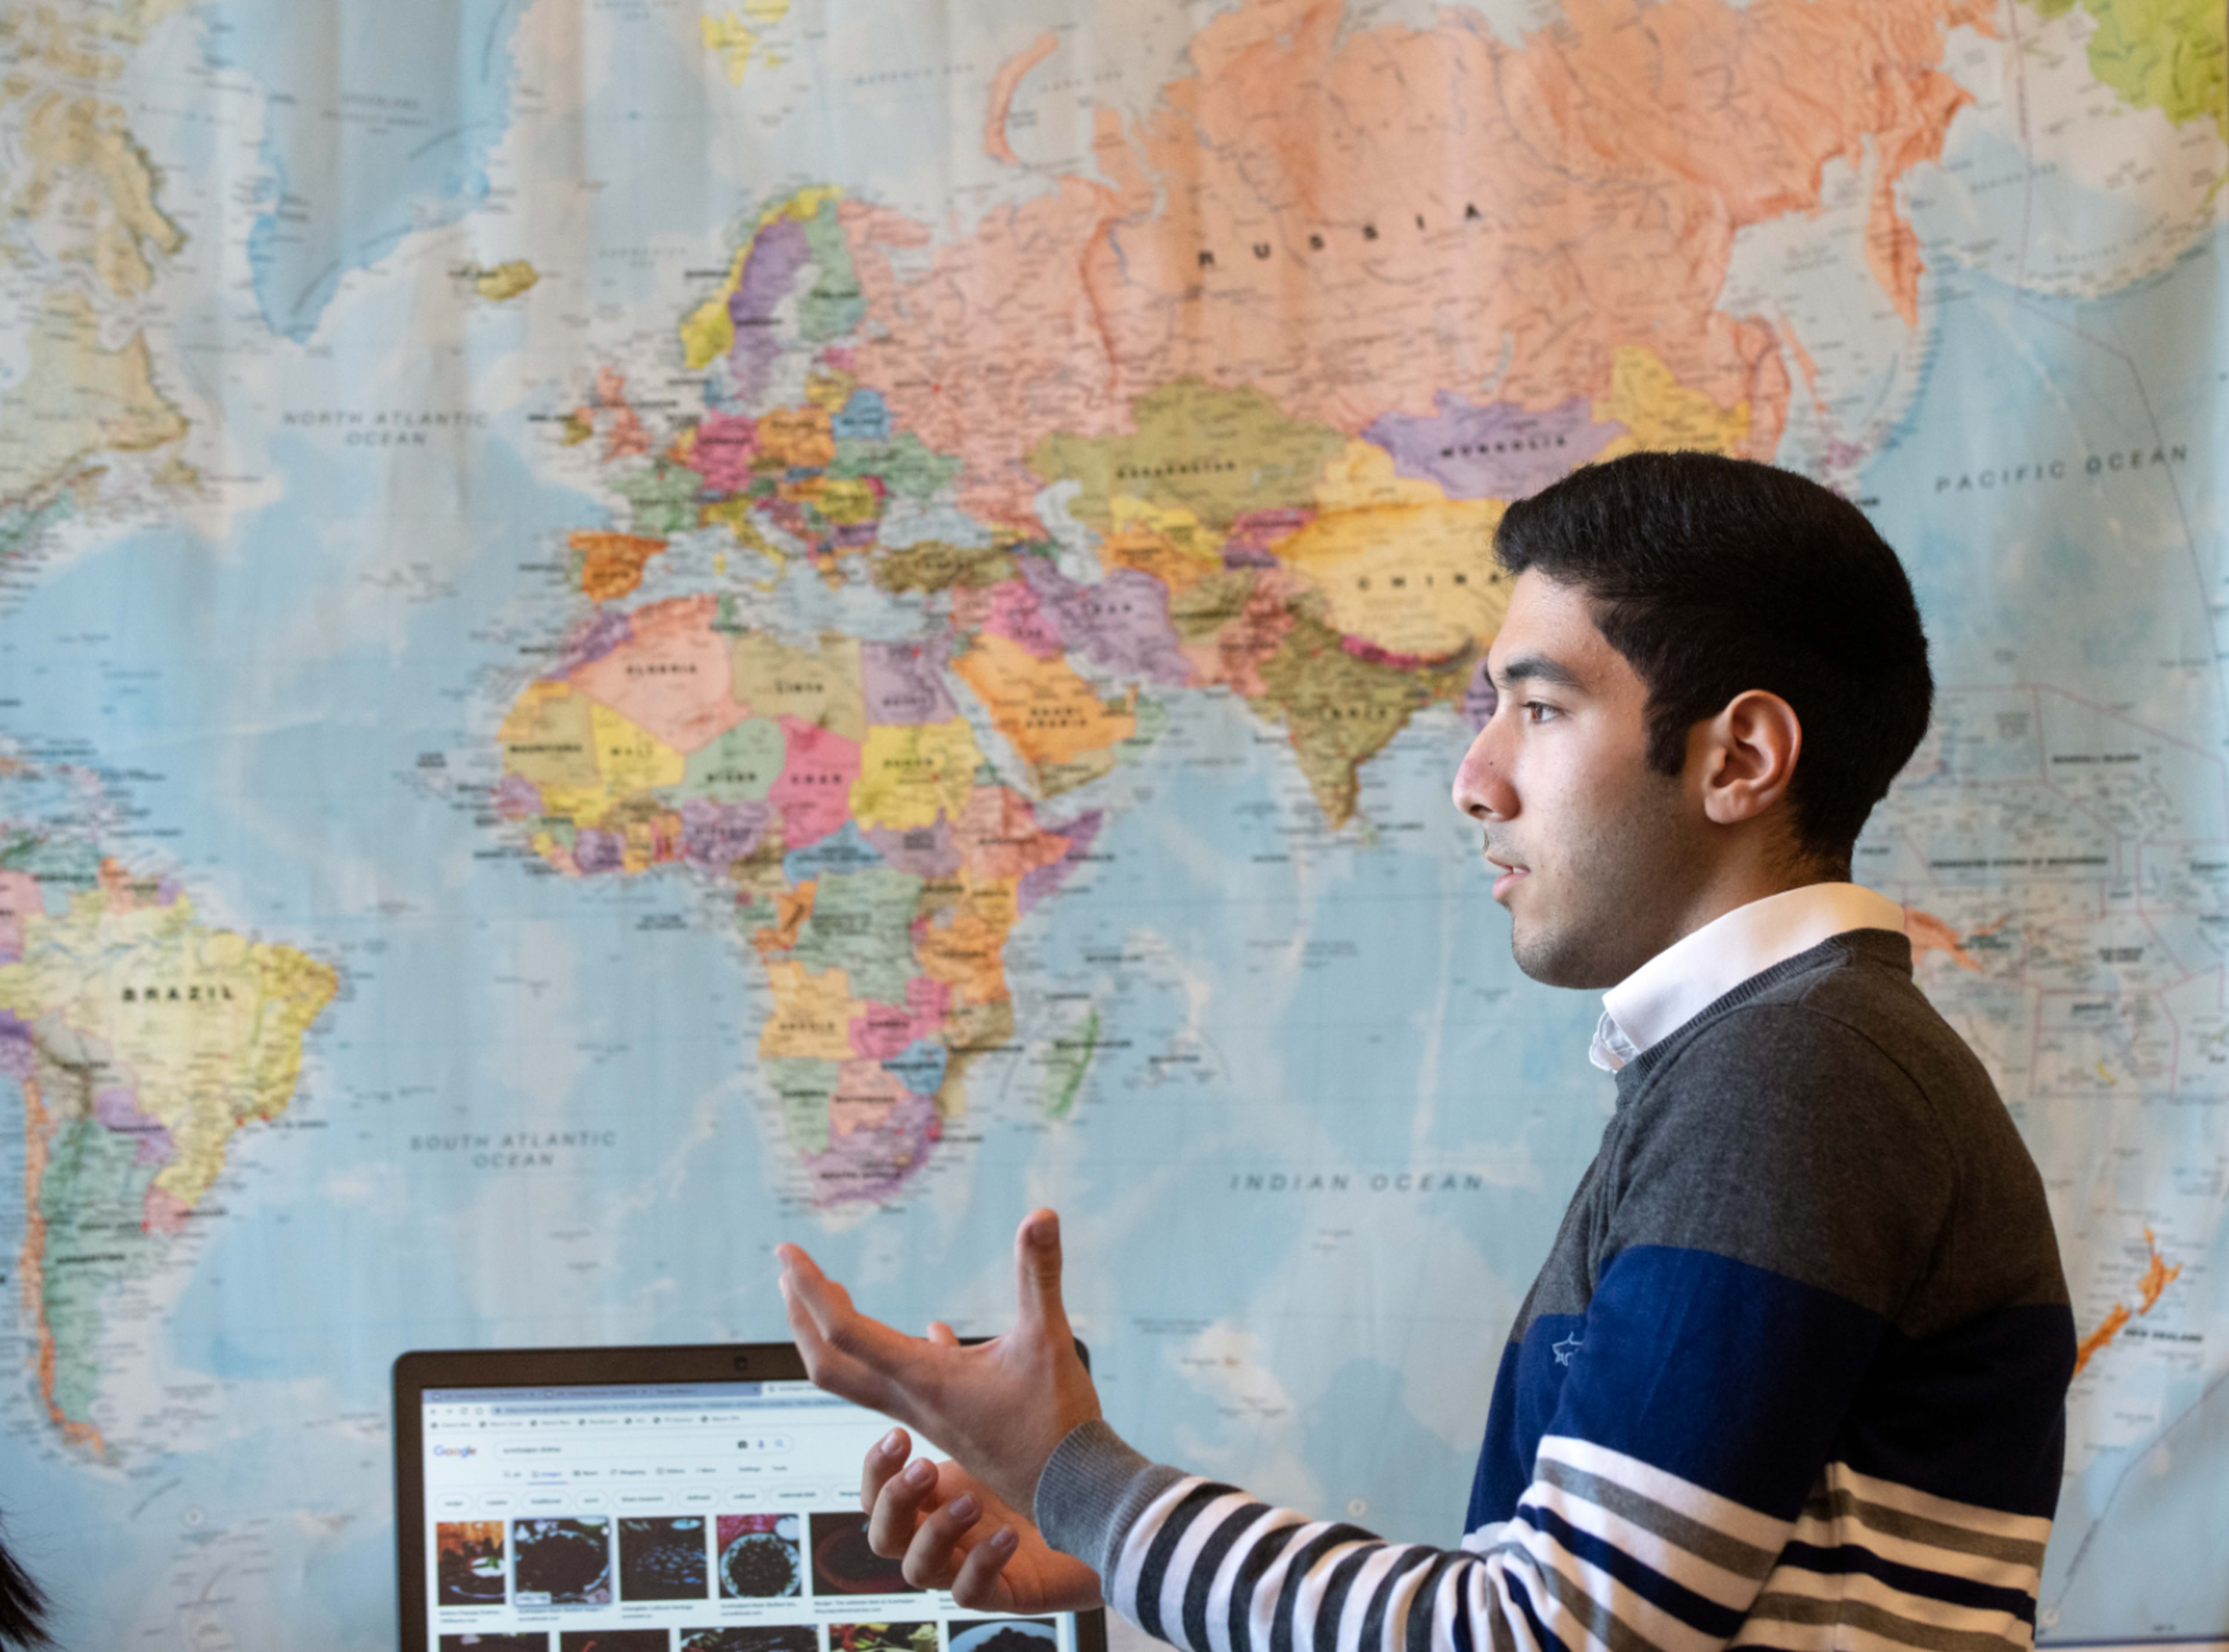 Student in front of world map